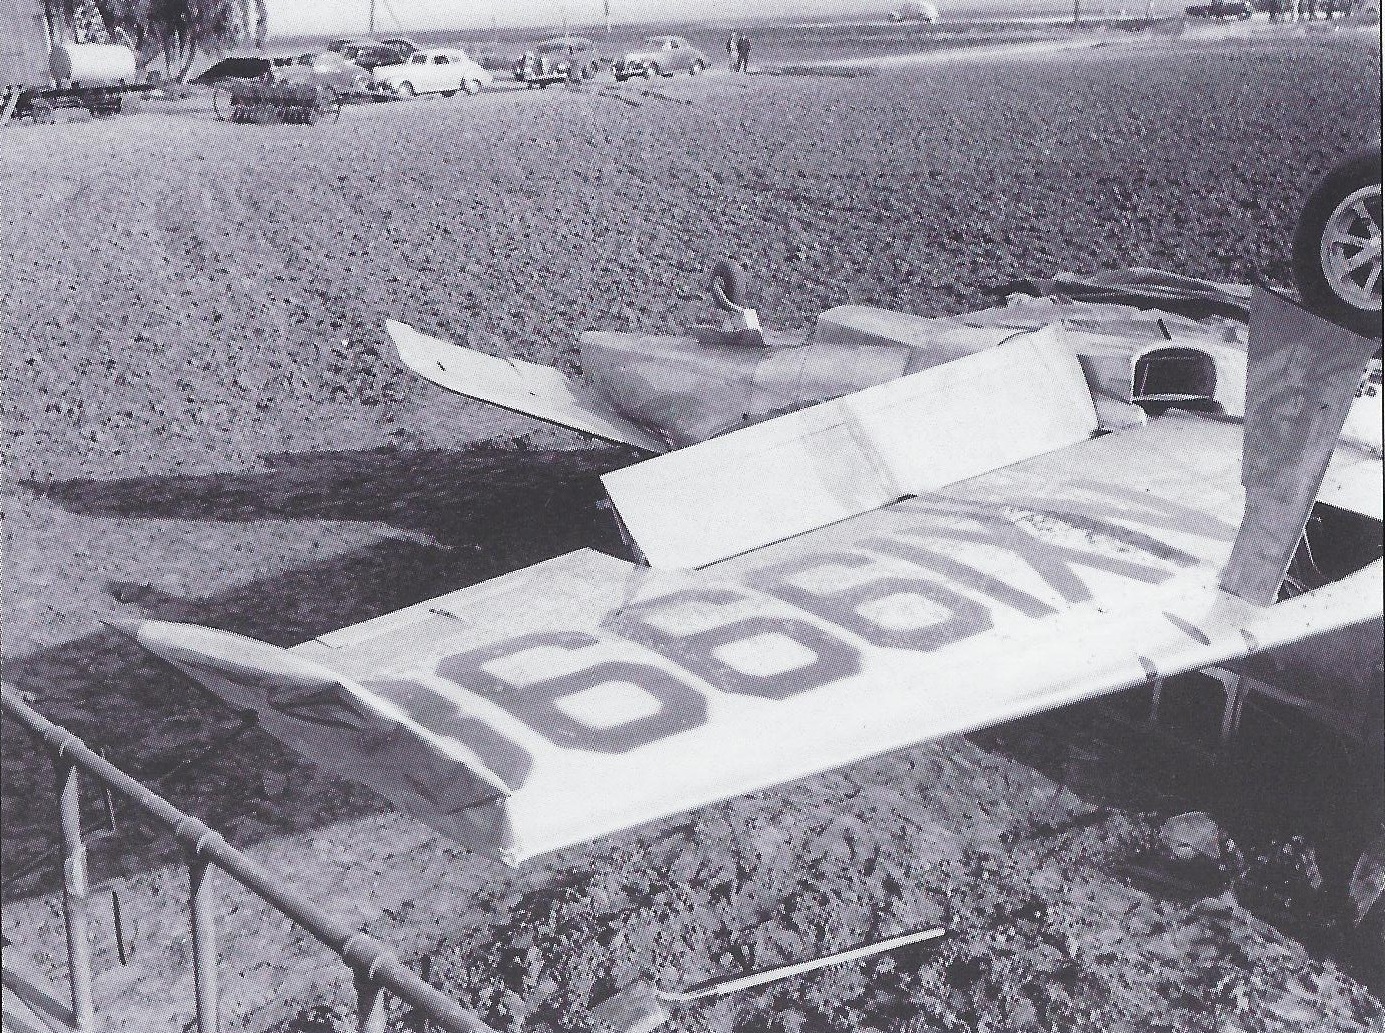 Damage to the wingtips, tail surfaces, fuselage. (North American Aviation Inc.)